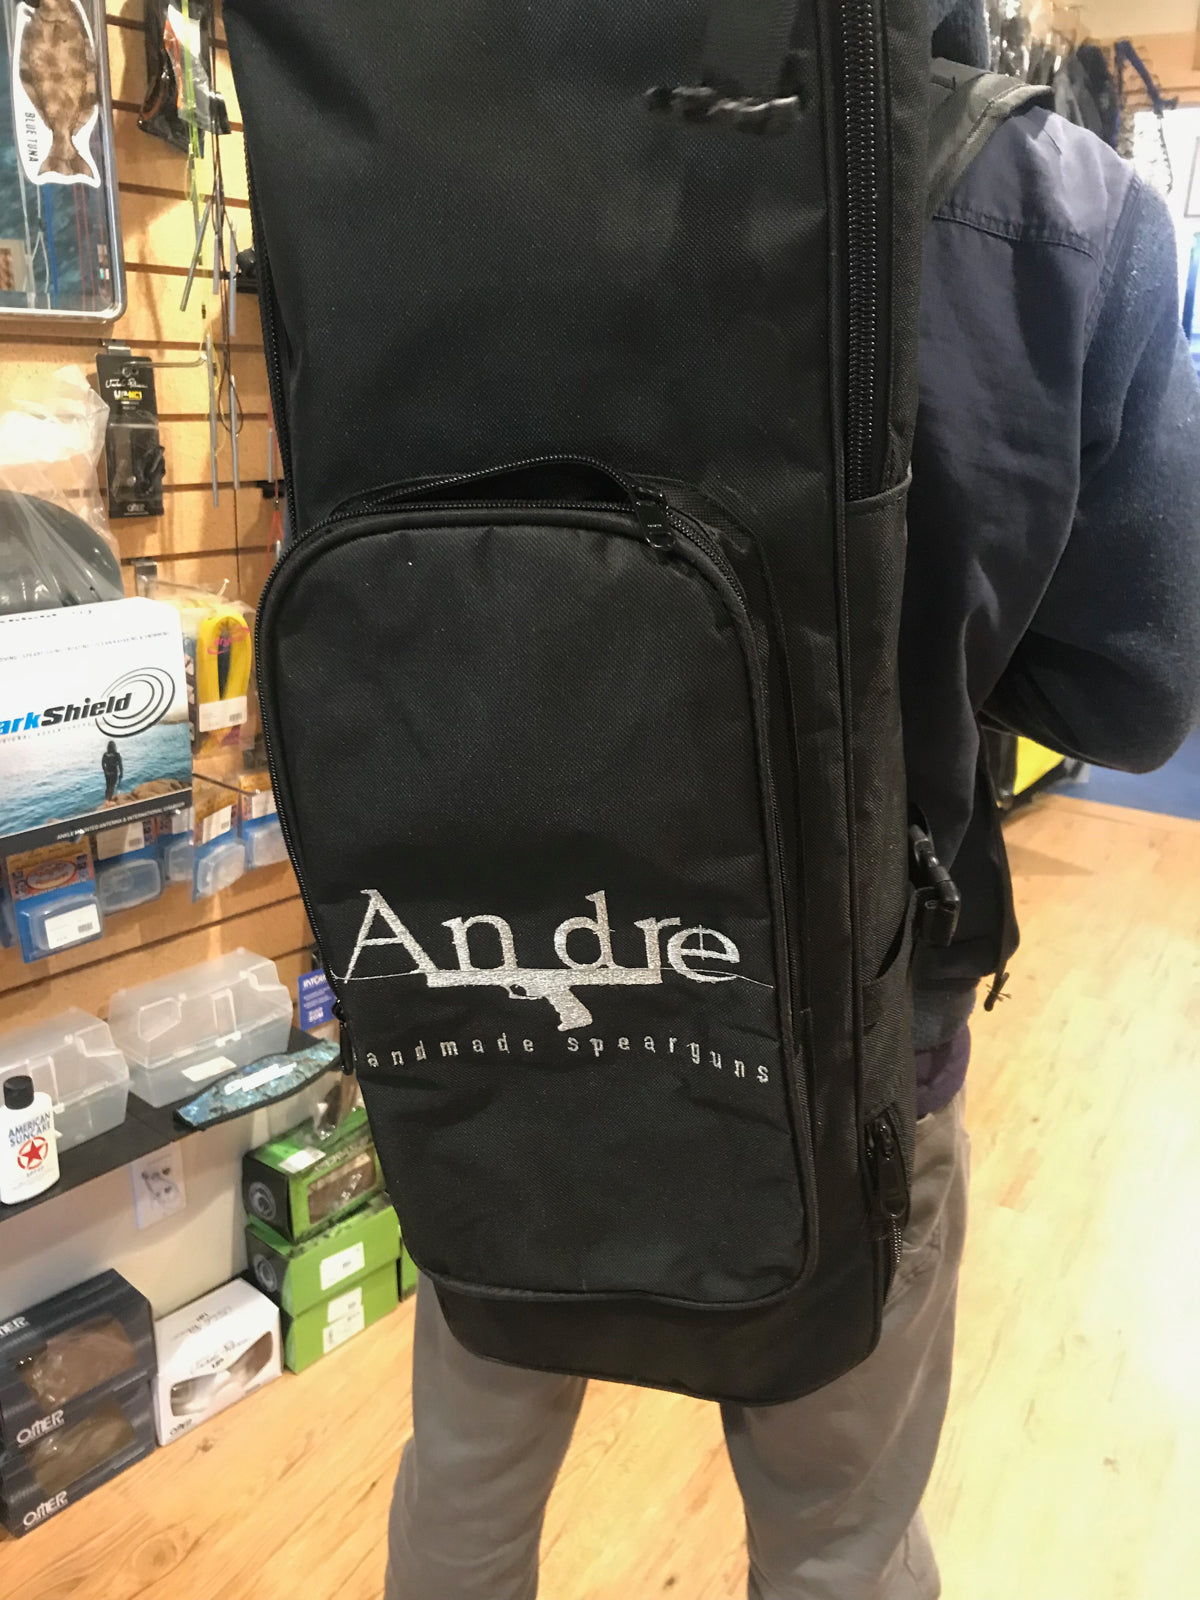 ANDRE SPEARGUNS - GEAR/FIN BACKPACK TRAVEL BAG - Being warn